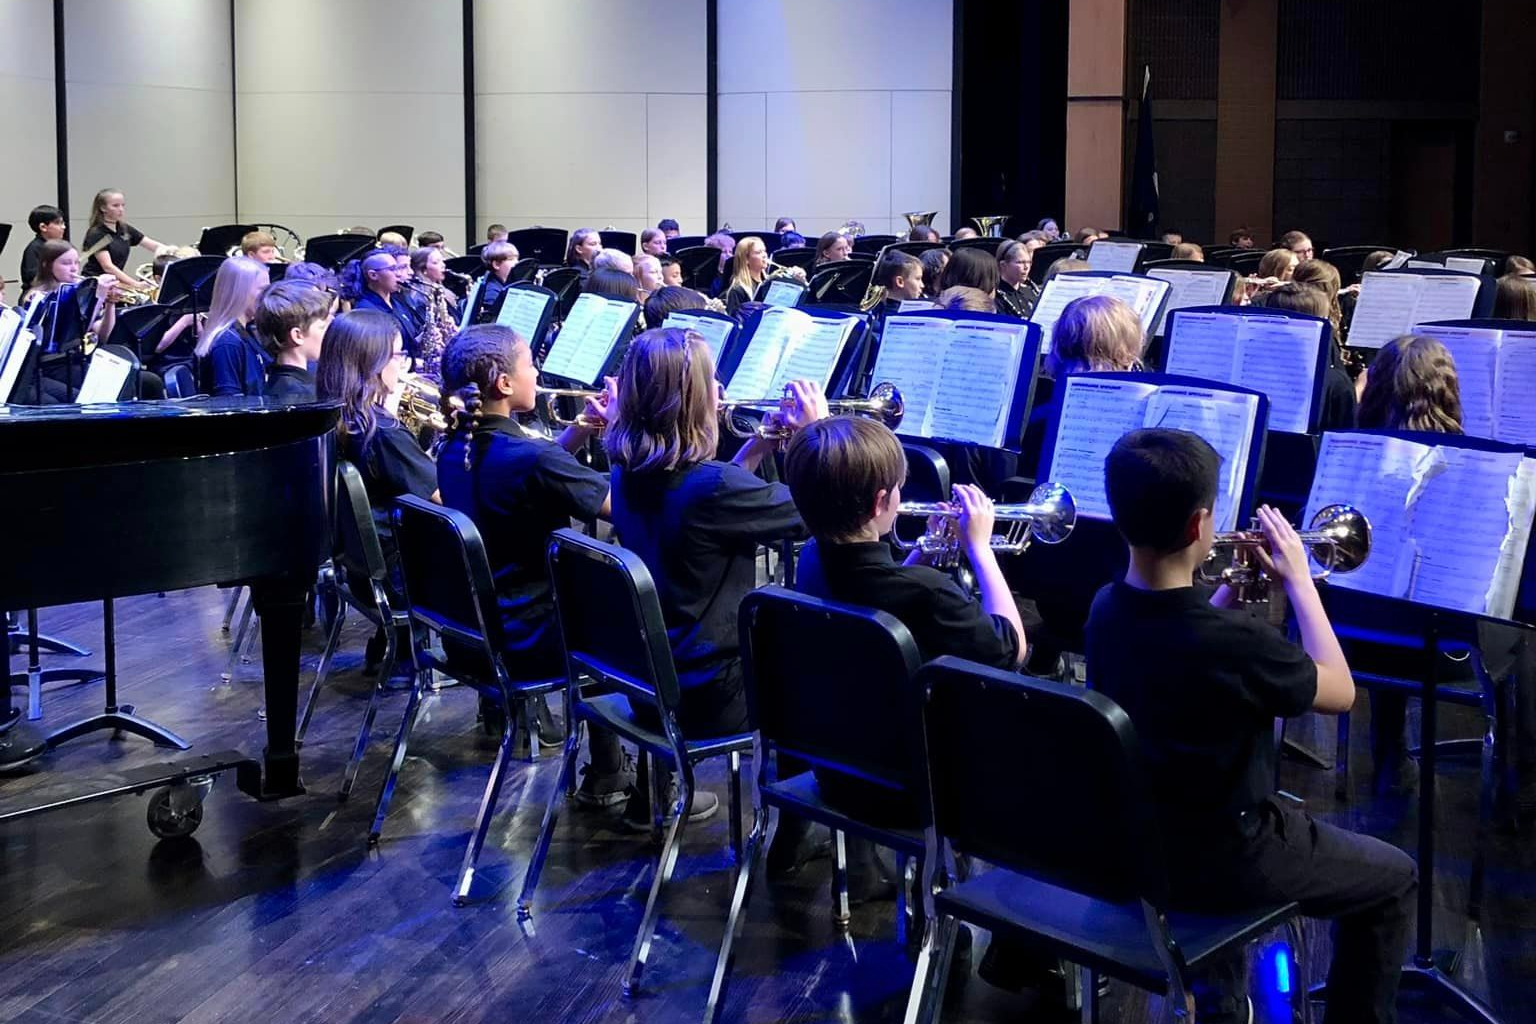 Middle School band performing